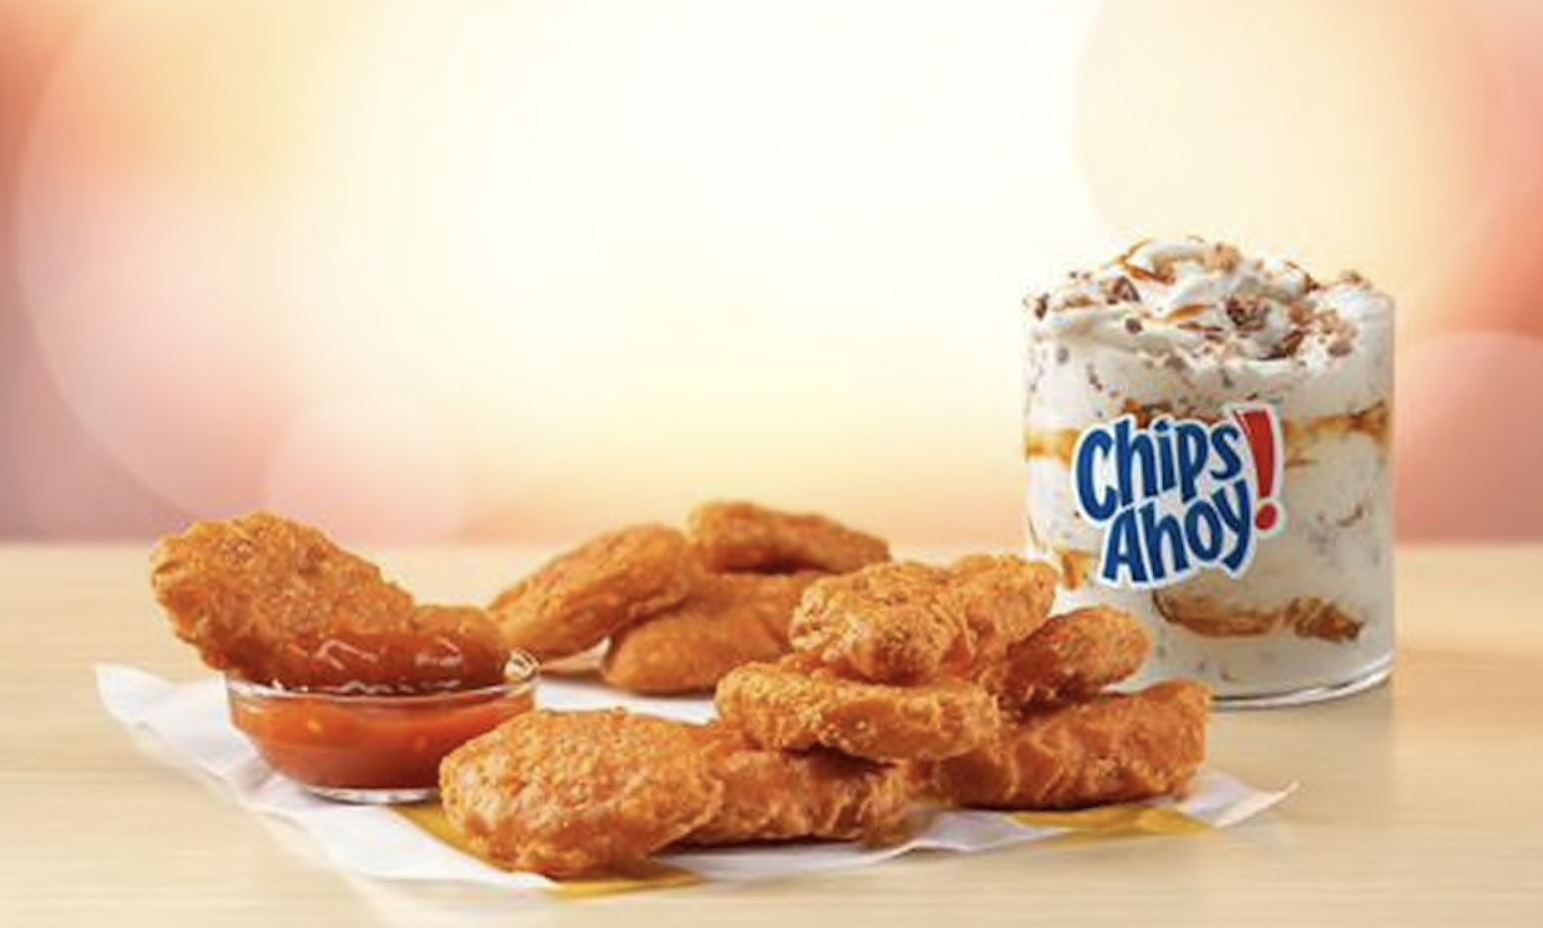 McDonald’s adds Spicy Chicken McNuggets and Chips Ahoy! McFlurry to its menu